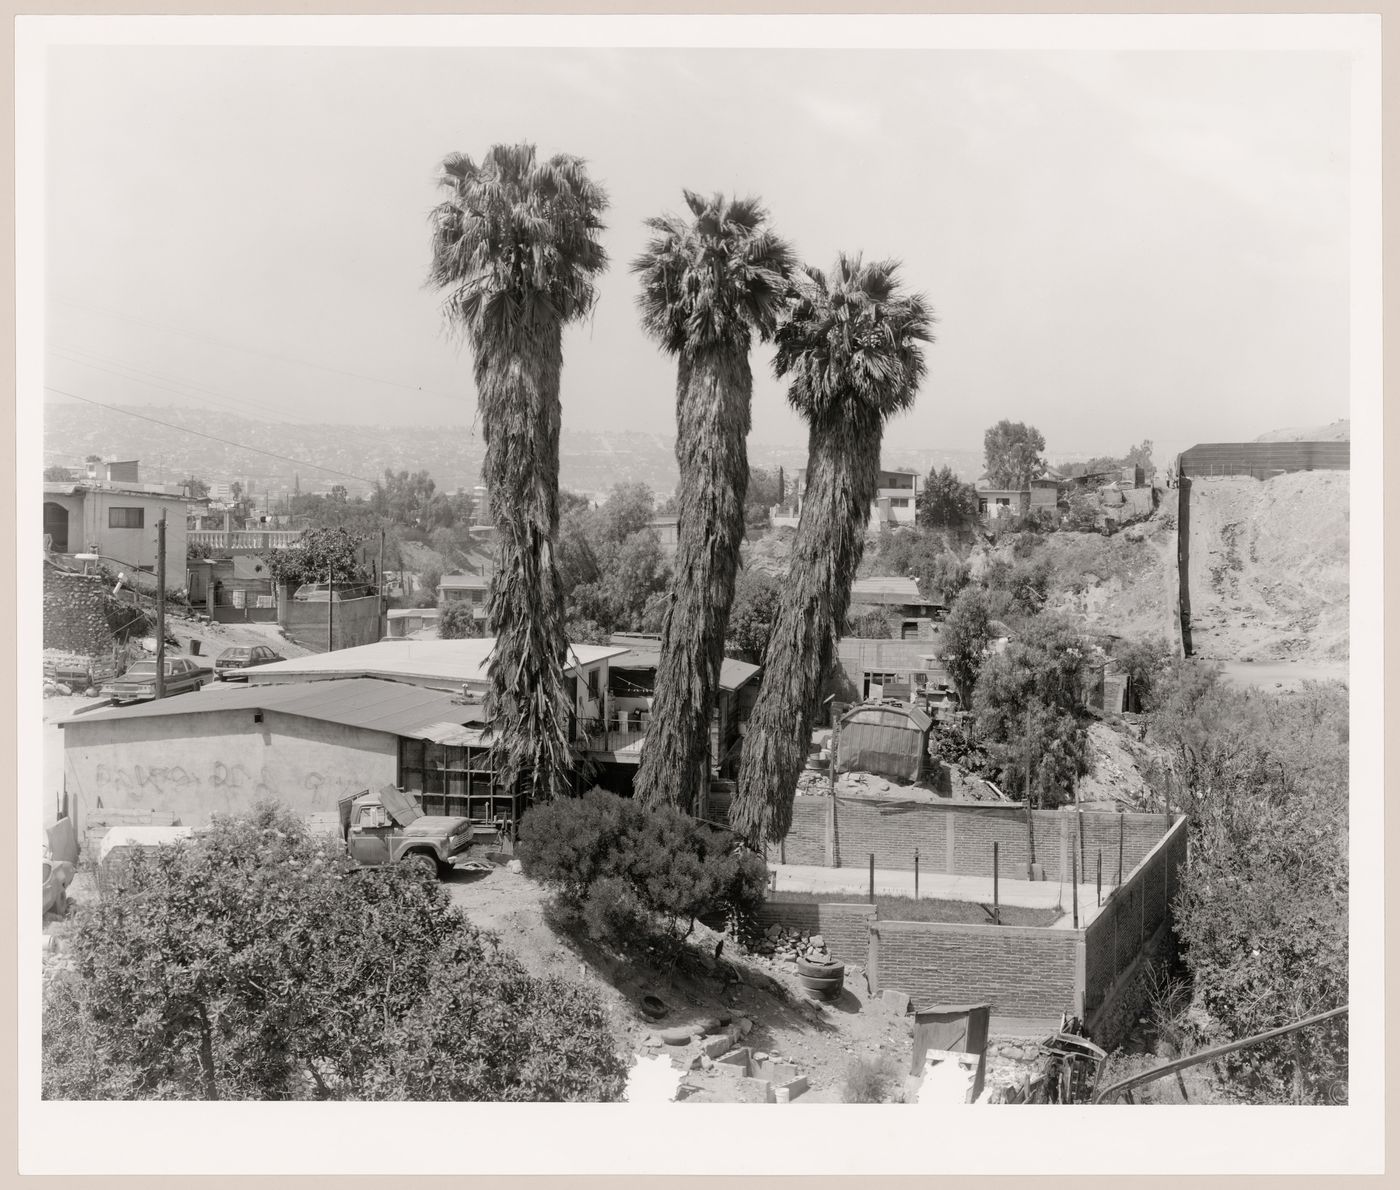 View of Colonia Libertad with trees and houses in the foreground and showing a partial view of the United States-Mexico border fence in the centre right, San Diego County, California, United States, and Colonia Libertad, Tijuana, Baja California, Mexico